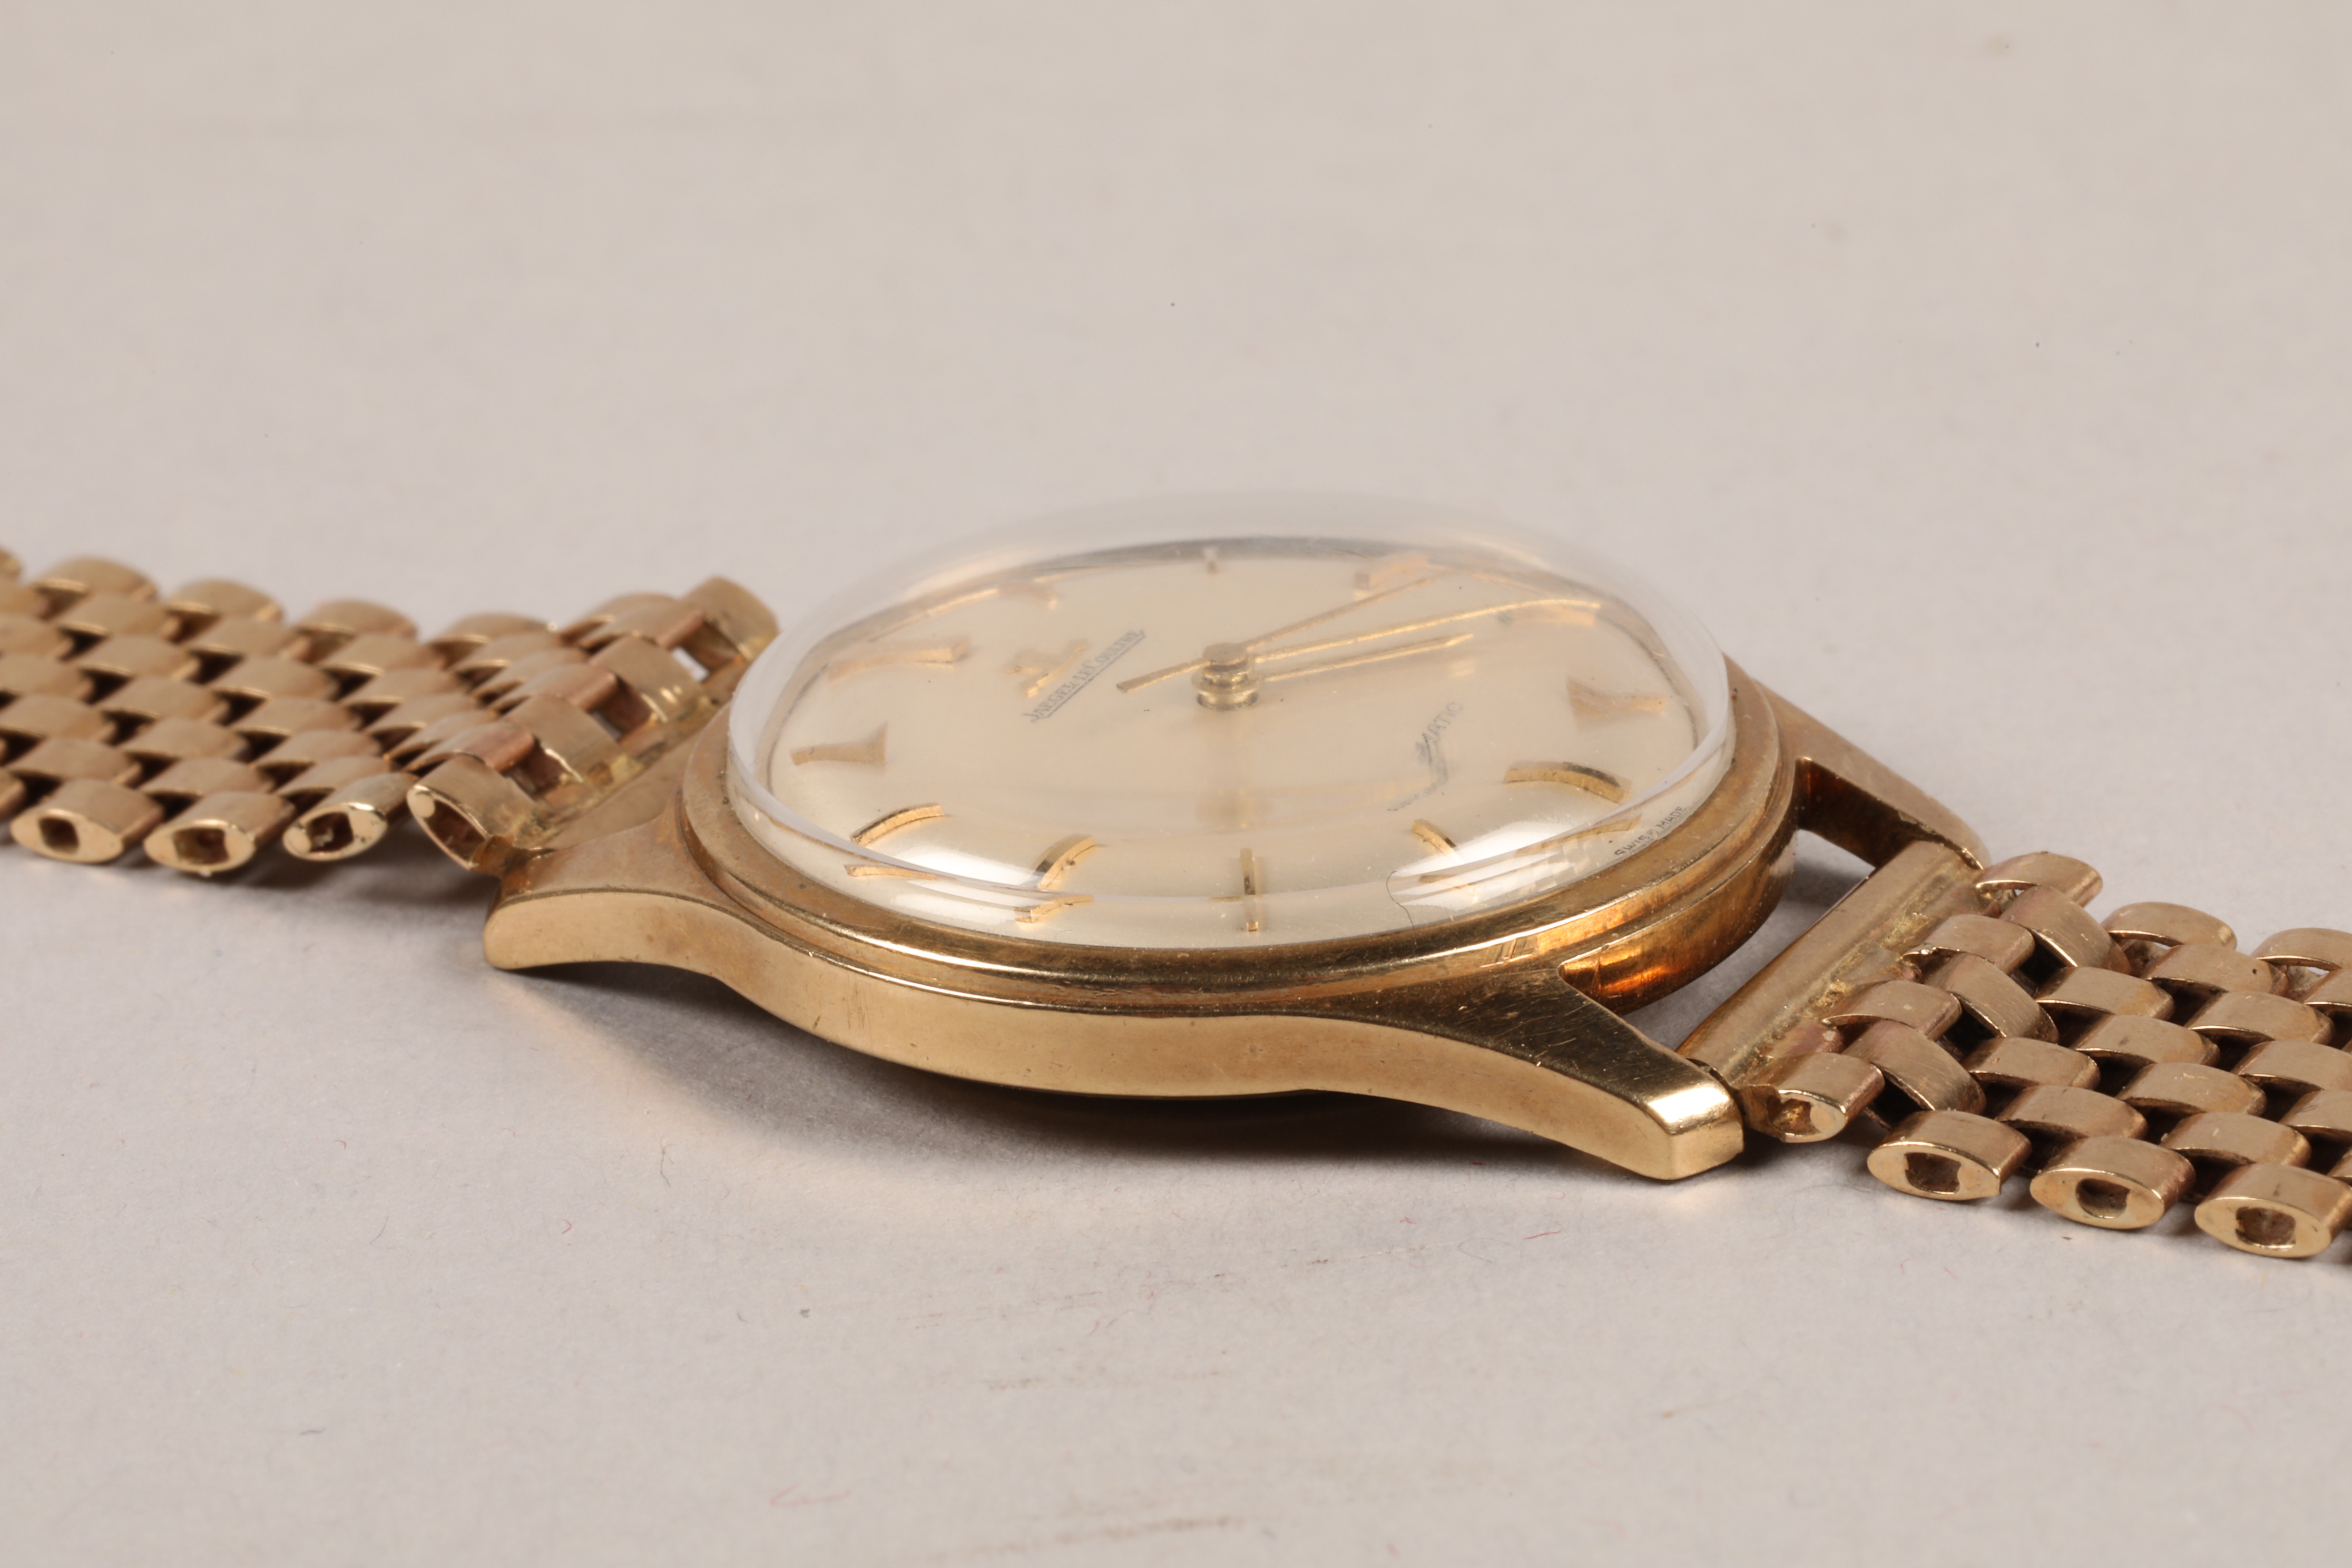 Gents 9 carat gold Jaeger-LeCoultre wristwatch, champagne dial with gilt baton hour markers, - Image 12 of 12